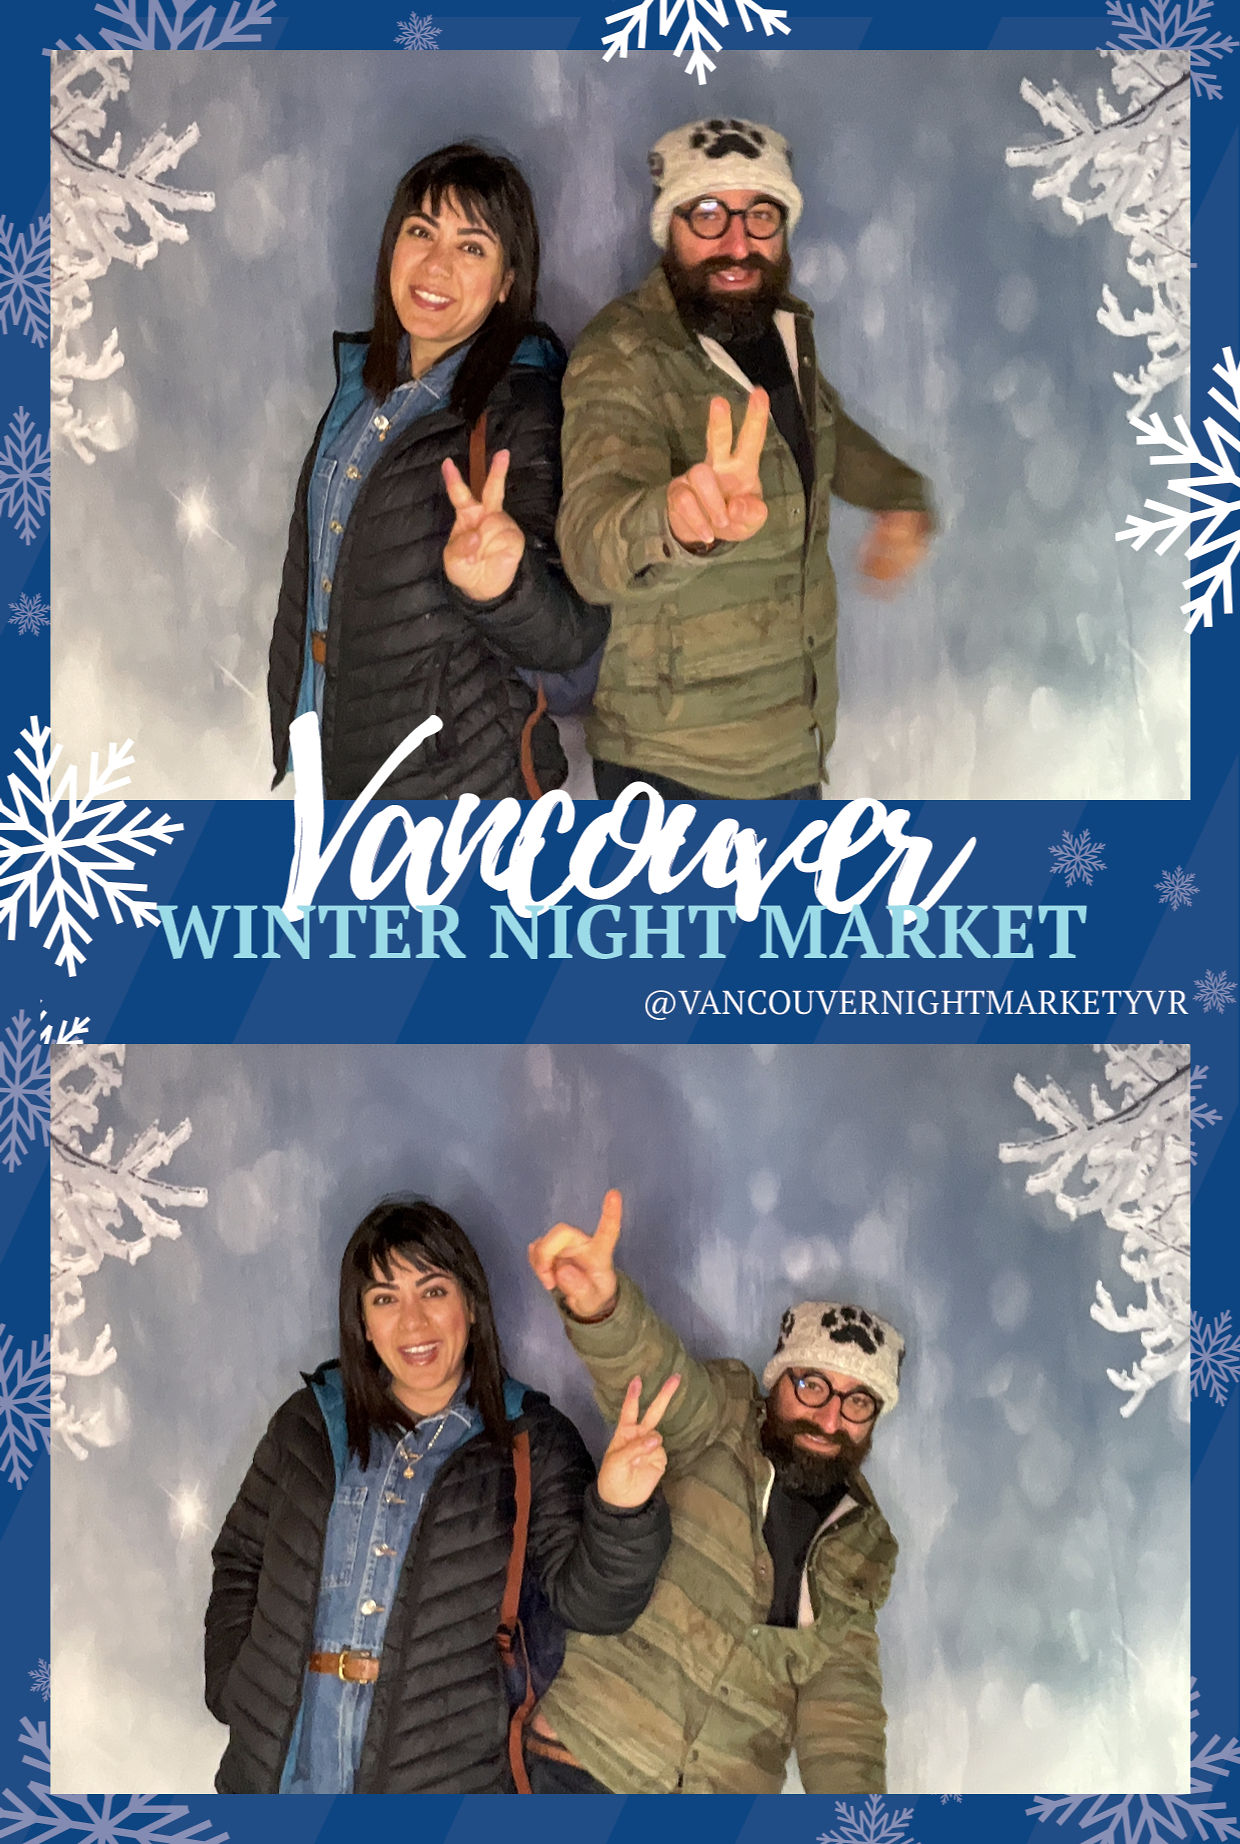 dang good booths, vancouver photo booth, vancouver night market, vancity photo booth, photo booth, art gallery, winter night market, selfie booth, print booth